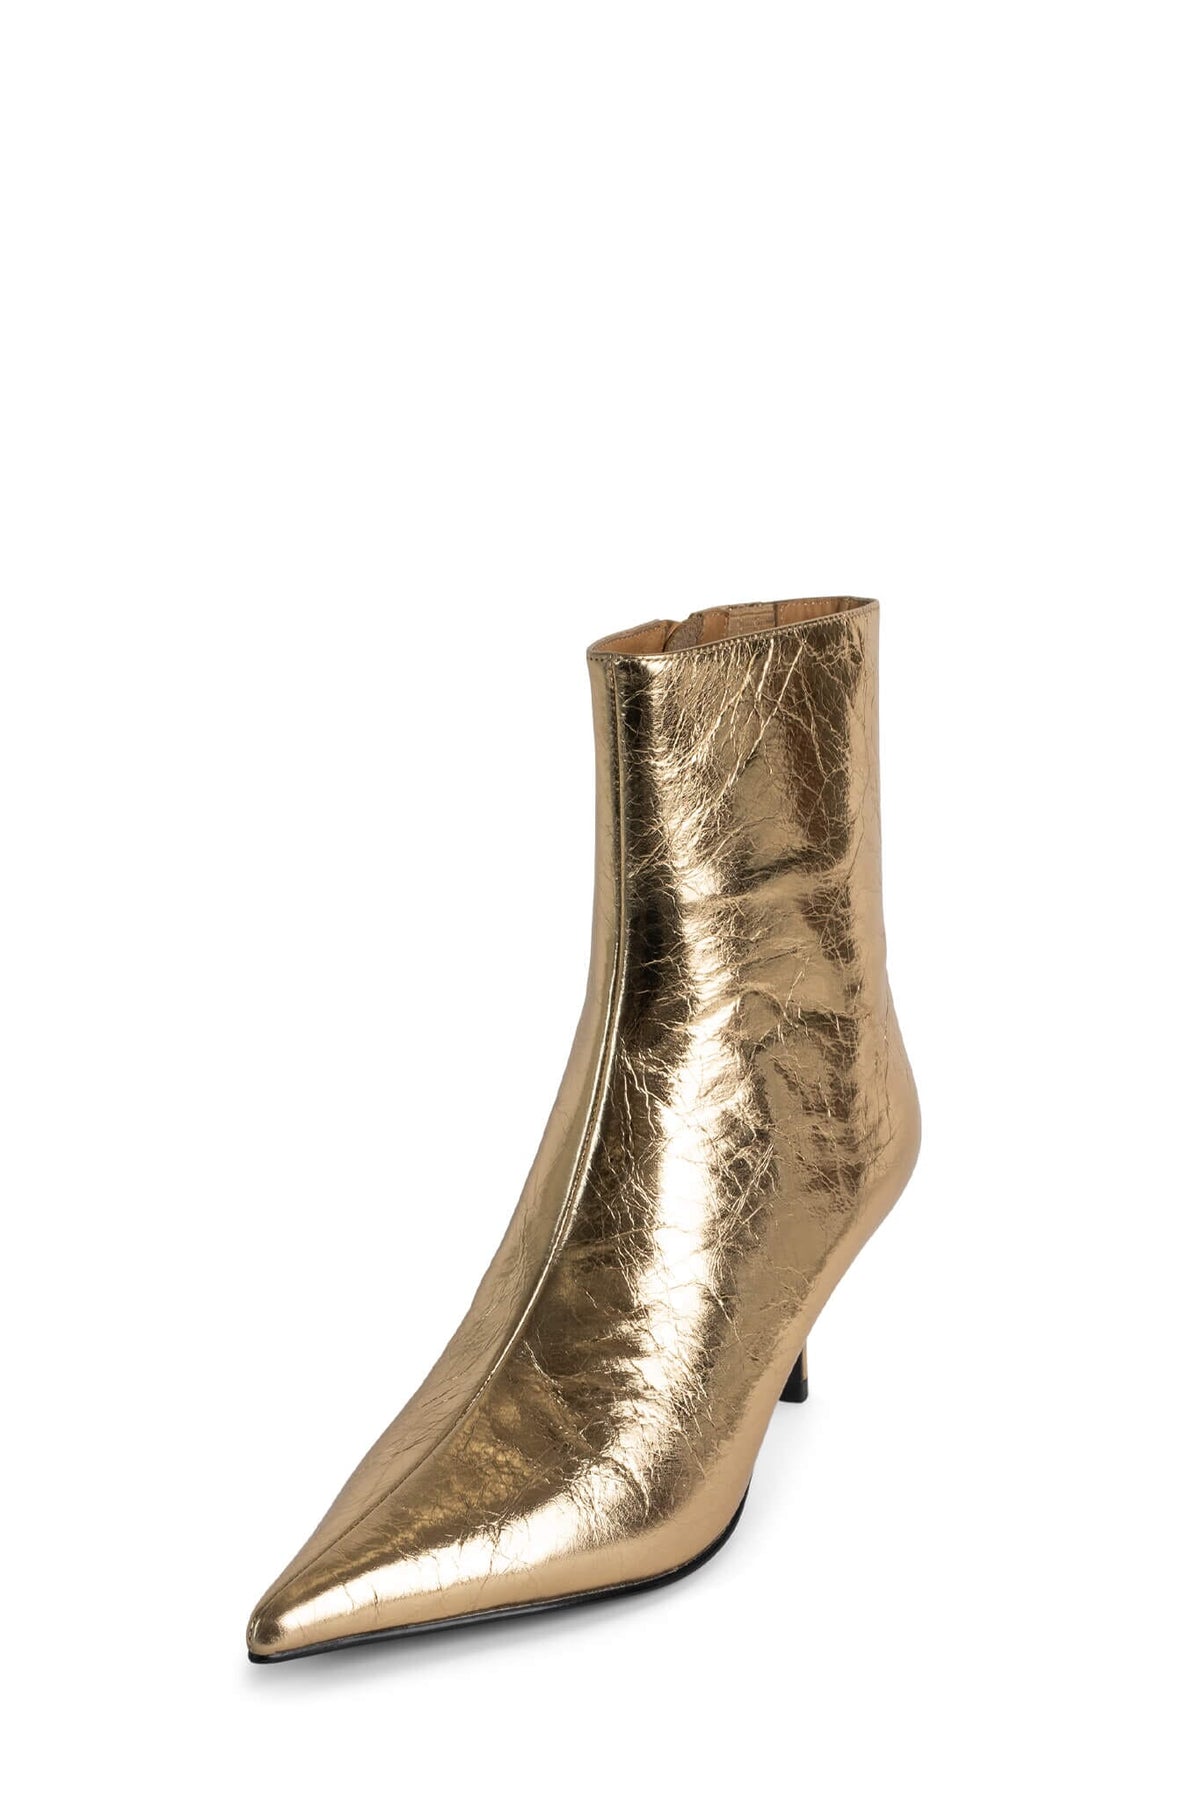 SINDEE Jeffrey Campbell Ankle Booties Gold